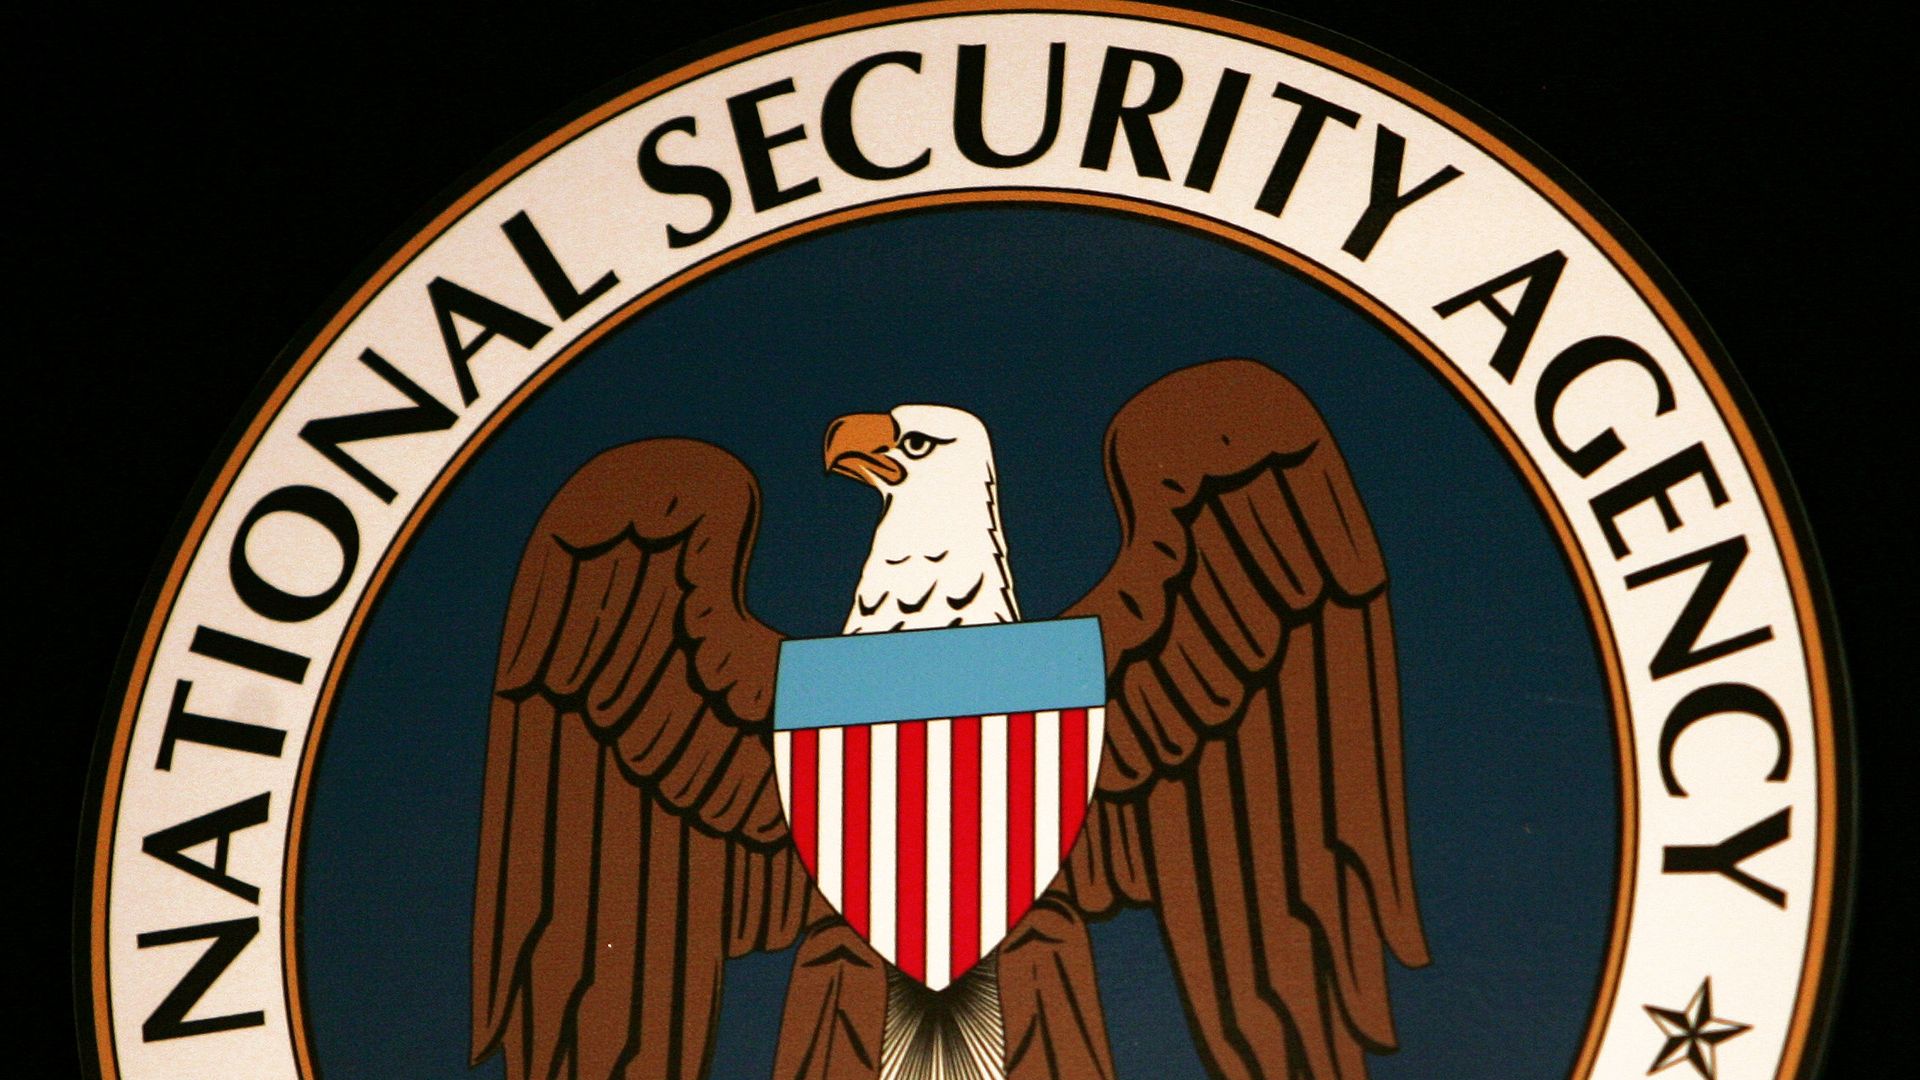 The seal of the National Security Agency.